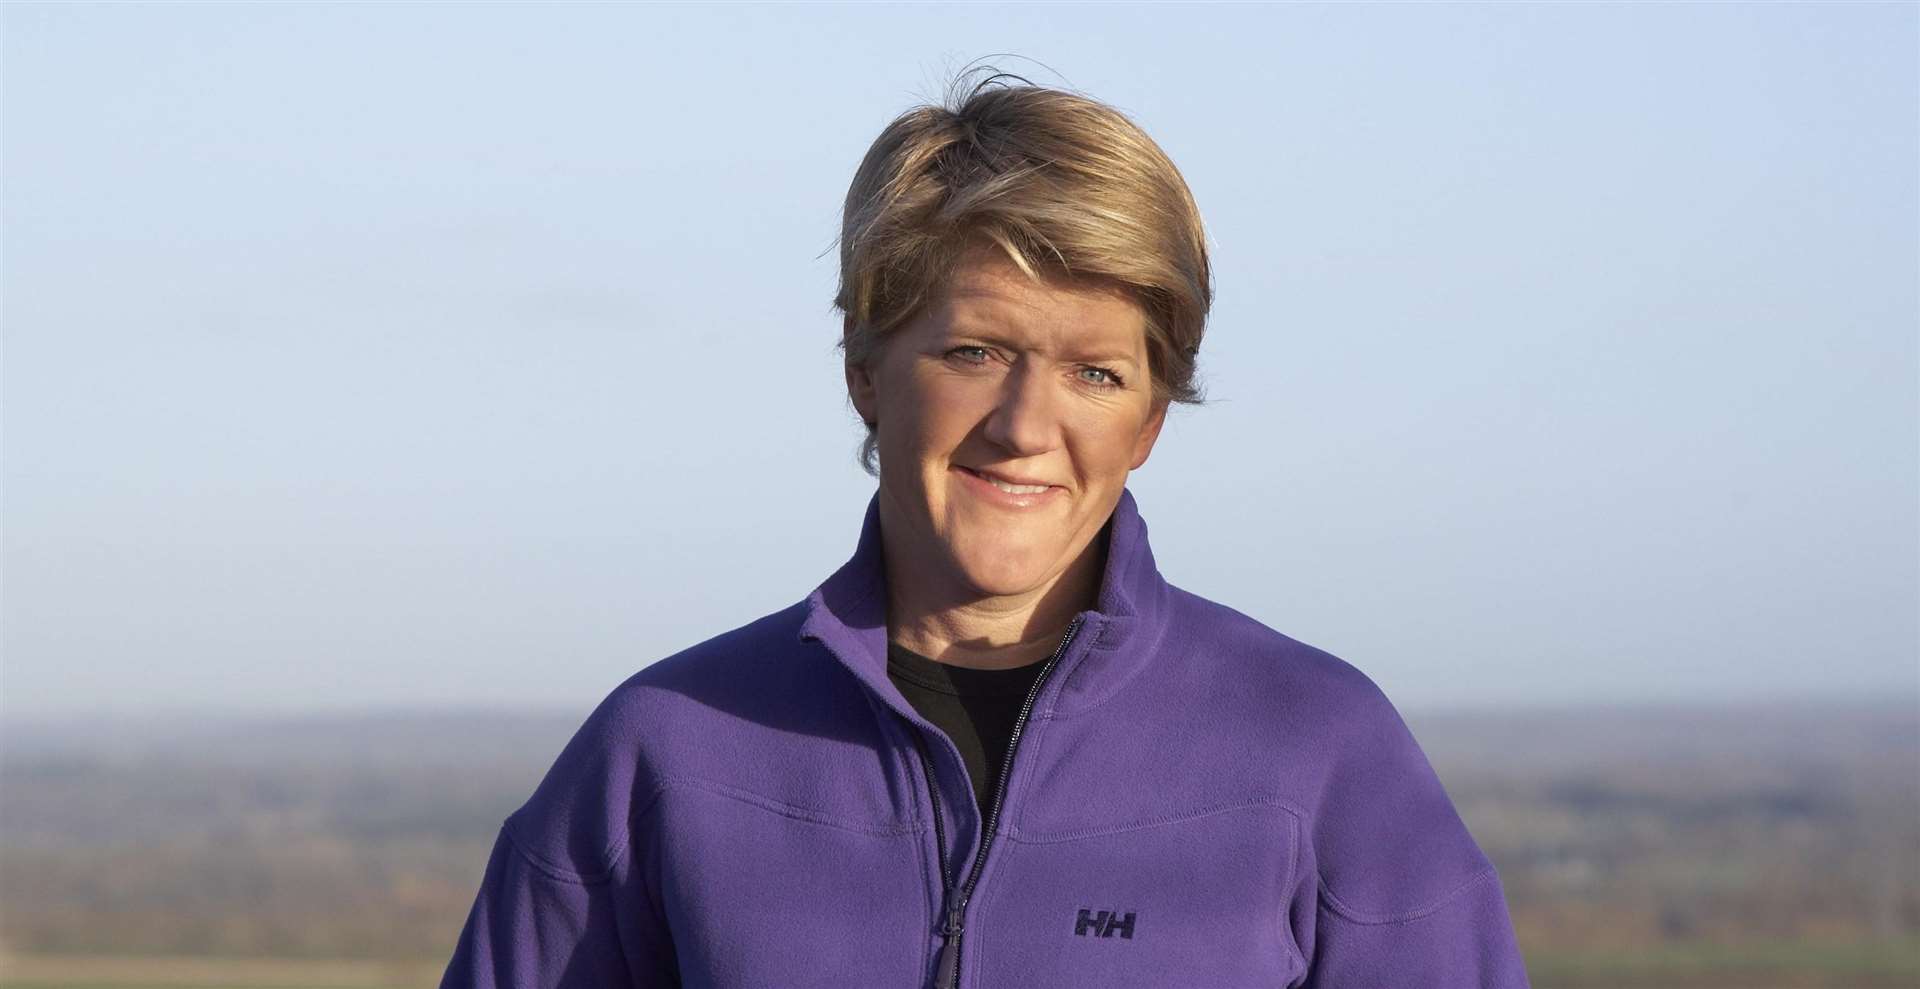 Clare Balding will judge the Leeds Castle 900 writing competition